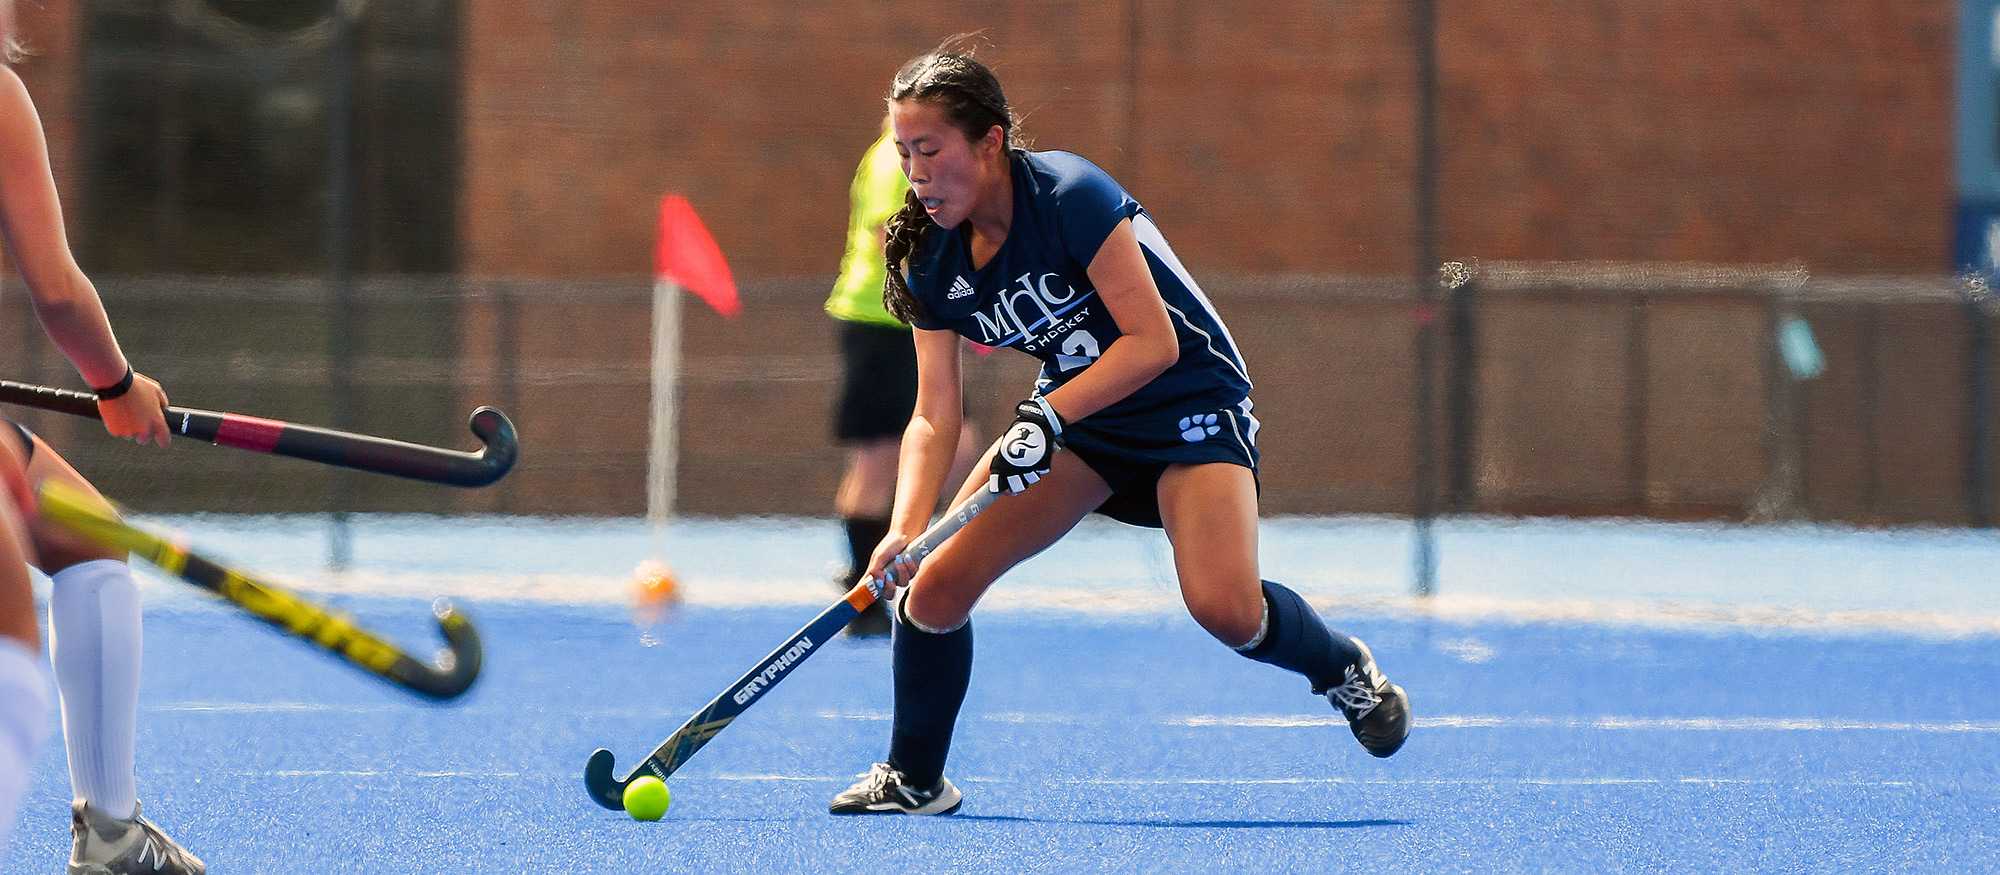 Anna Induni had her third multi-goal game of the season with two goals in Mount Holyoke's 5-0 win at Nichols College on Oct. 25, 2022. (RJB Sports file photo)